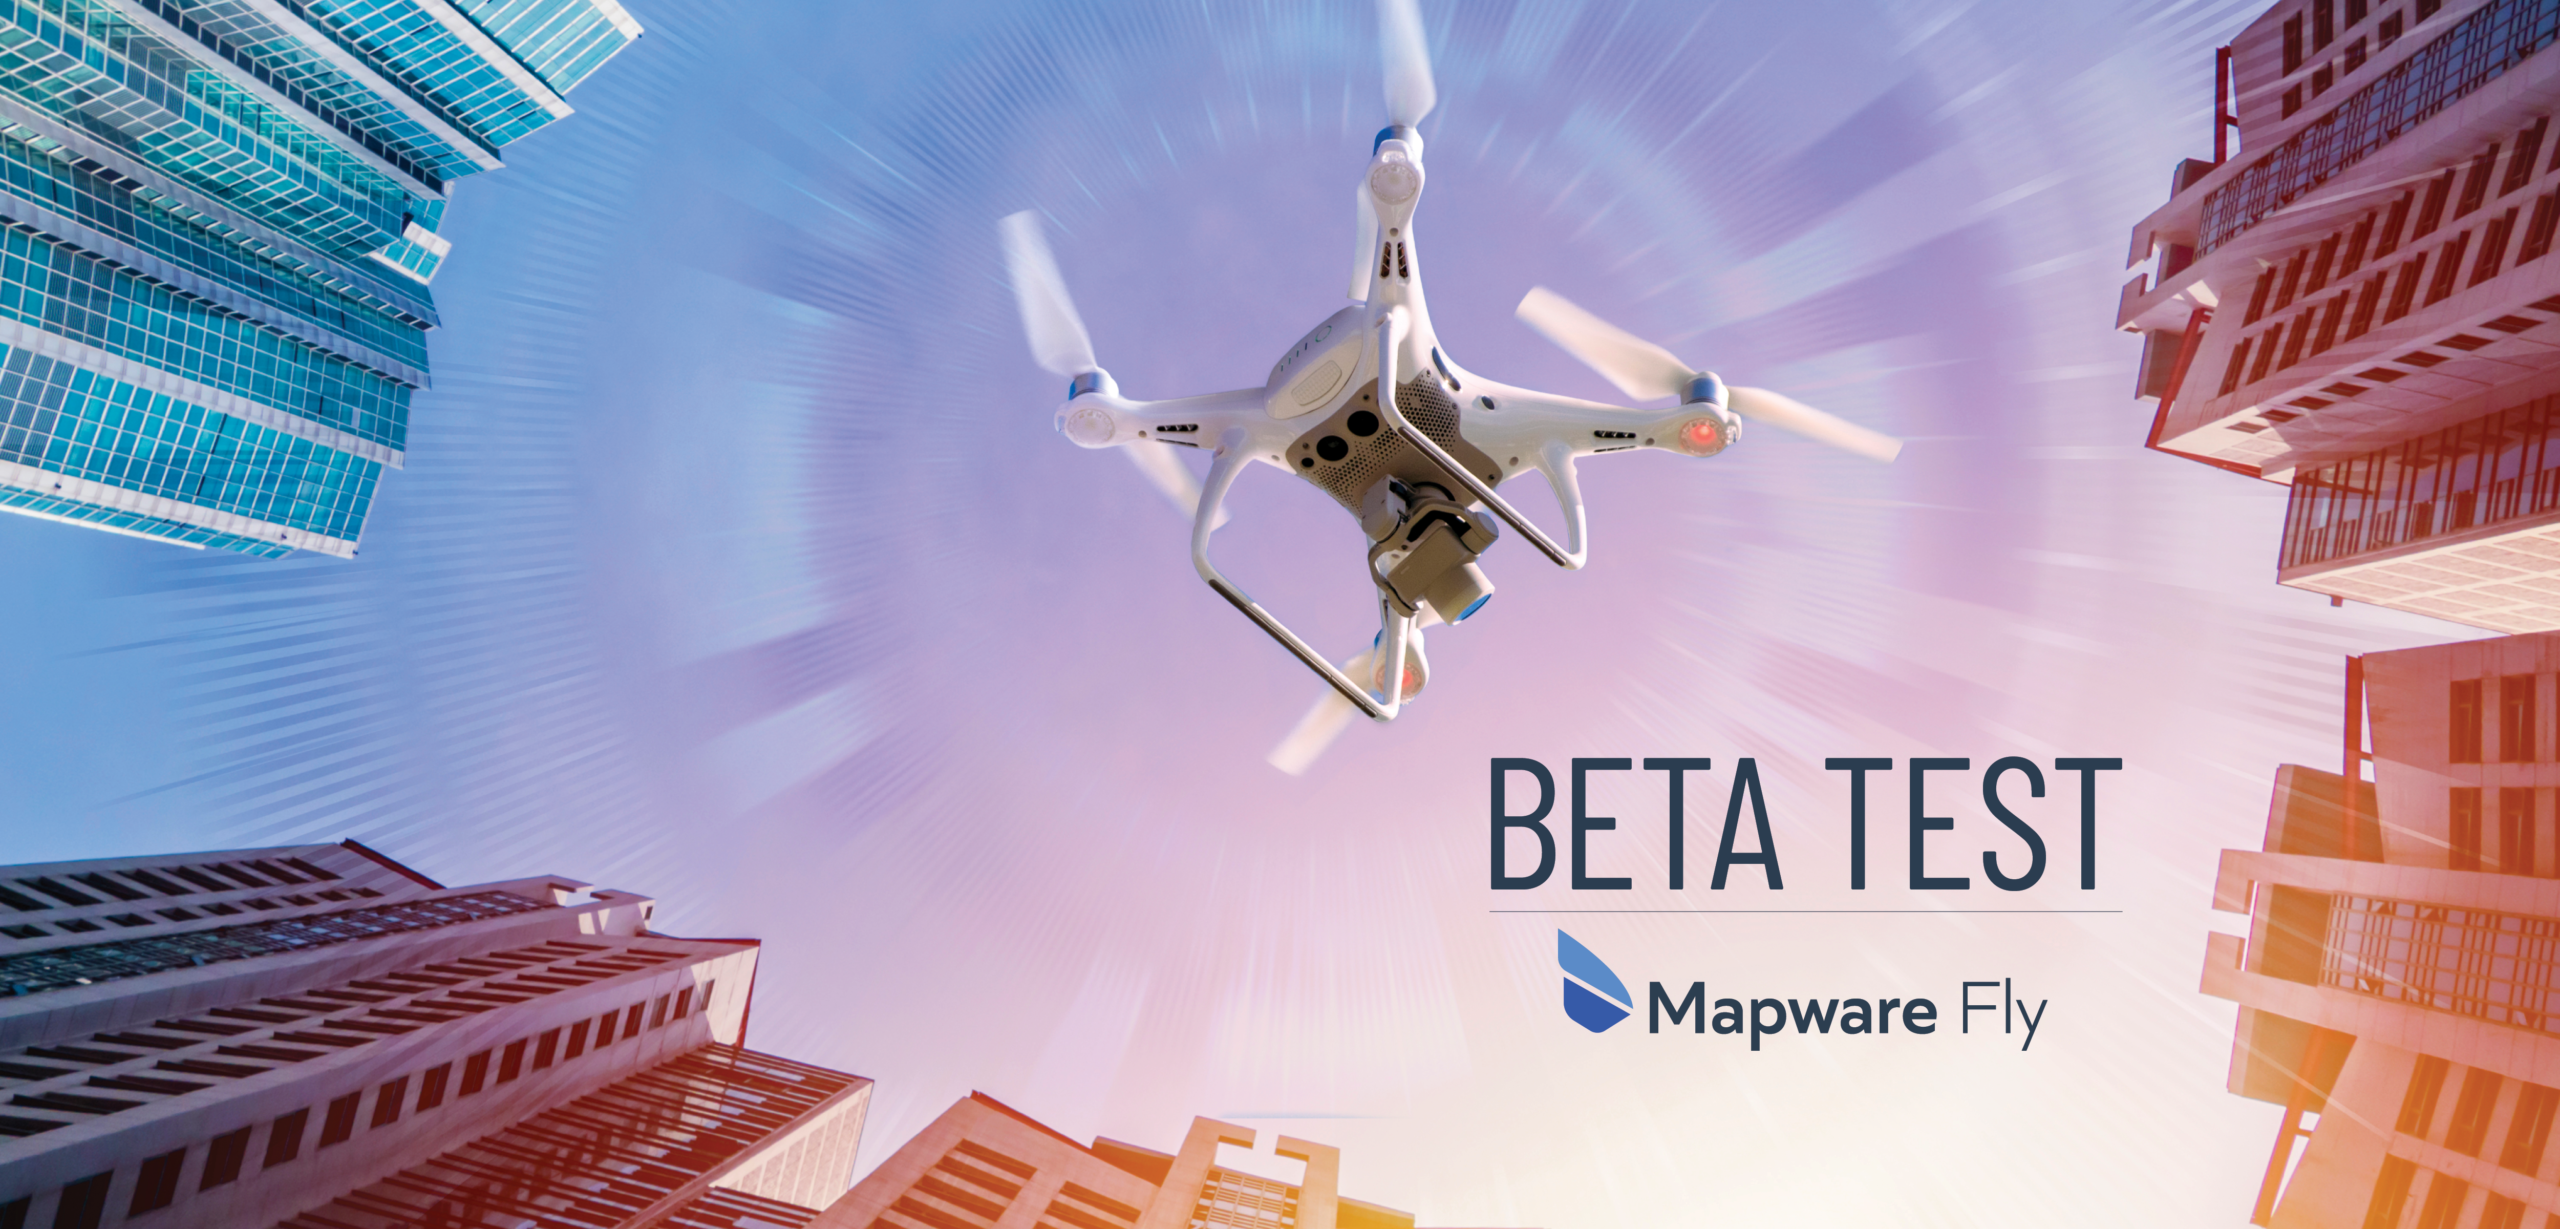 A drone descends between skyscrapers next to the message "Beta Test Mapware Fly".